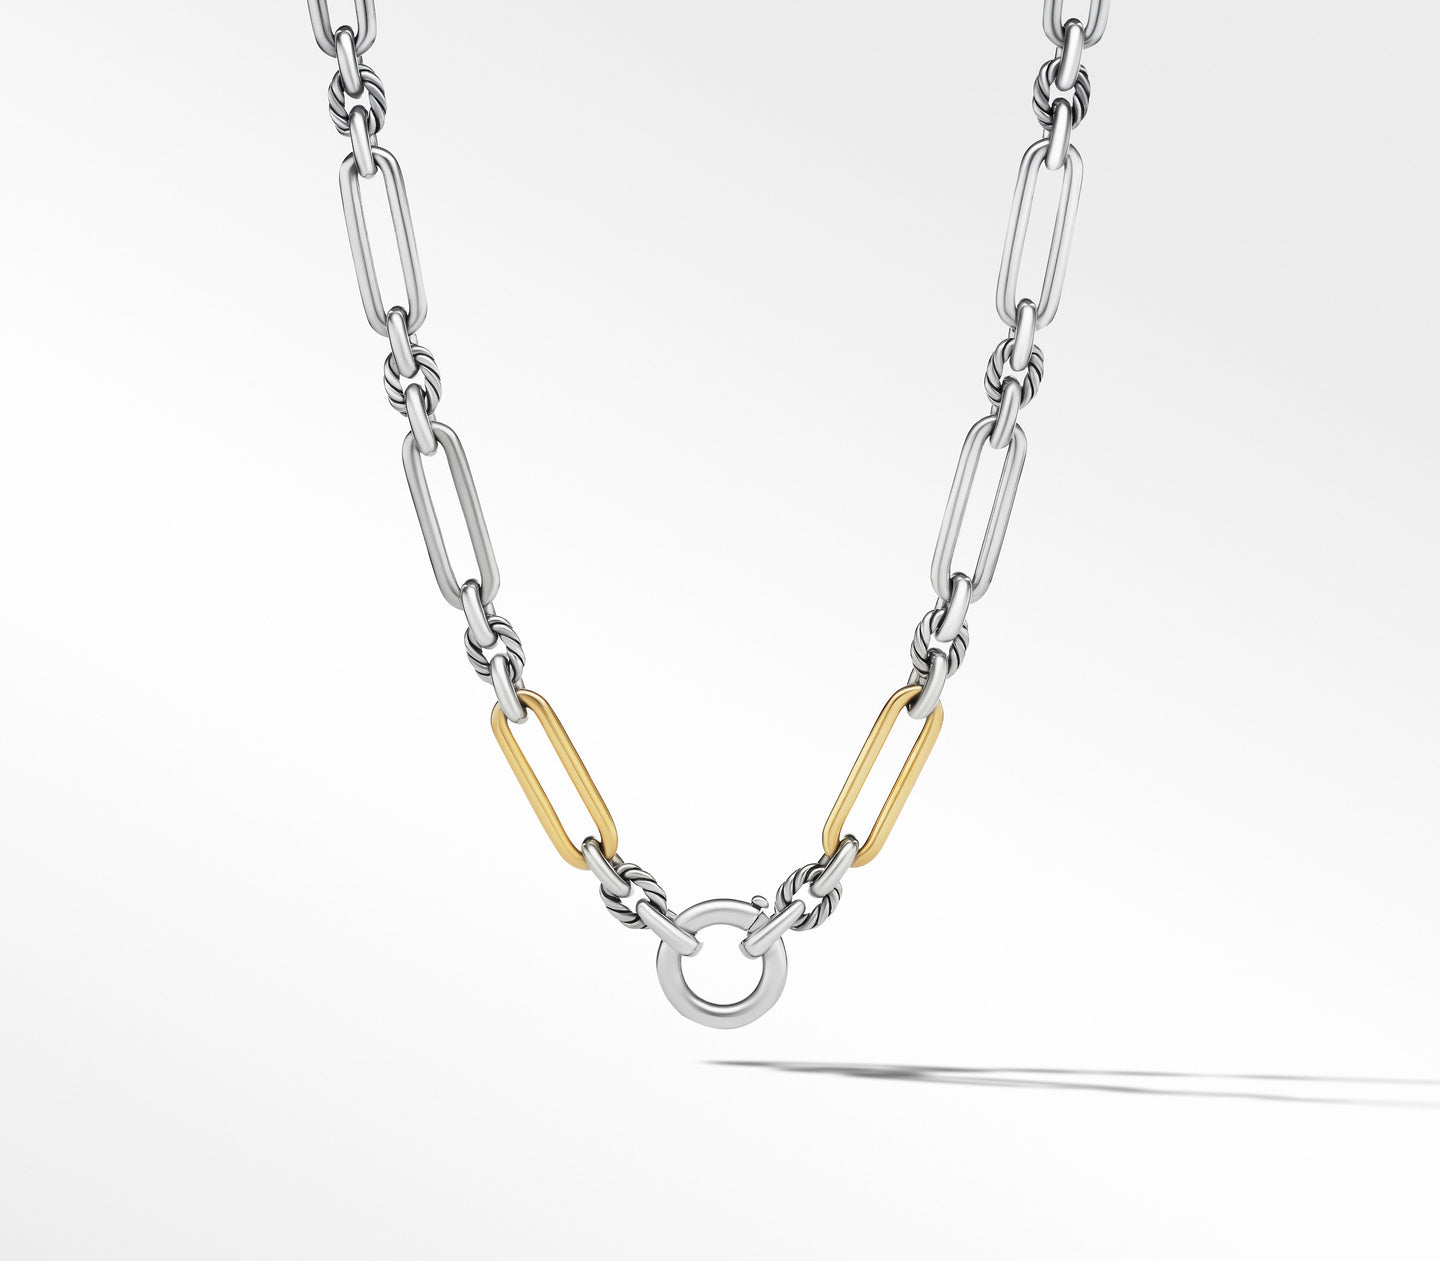 Lexington Chain with 18K Yellow Gold Necklace, 21